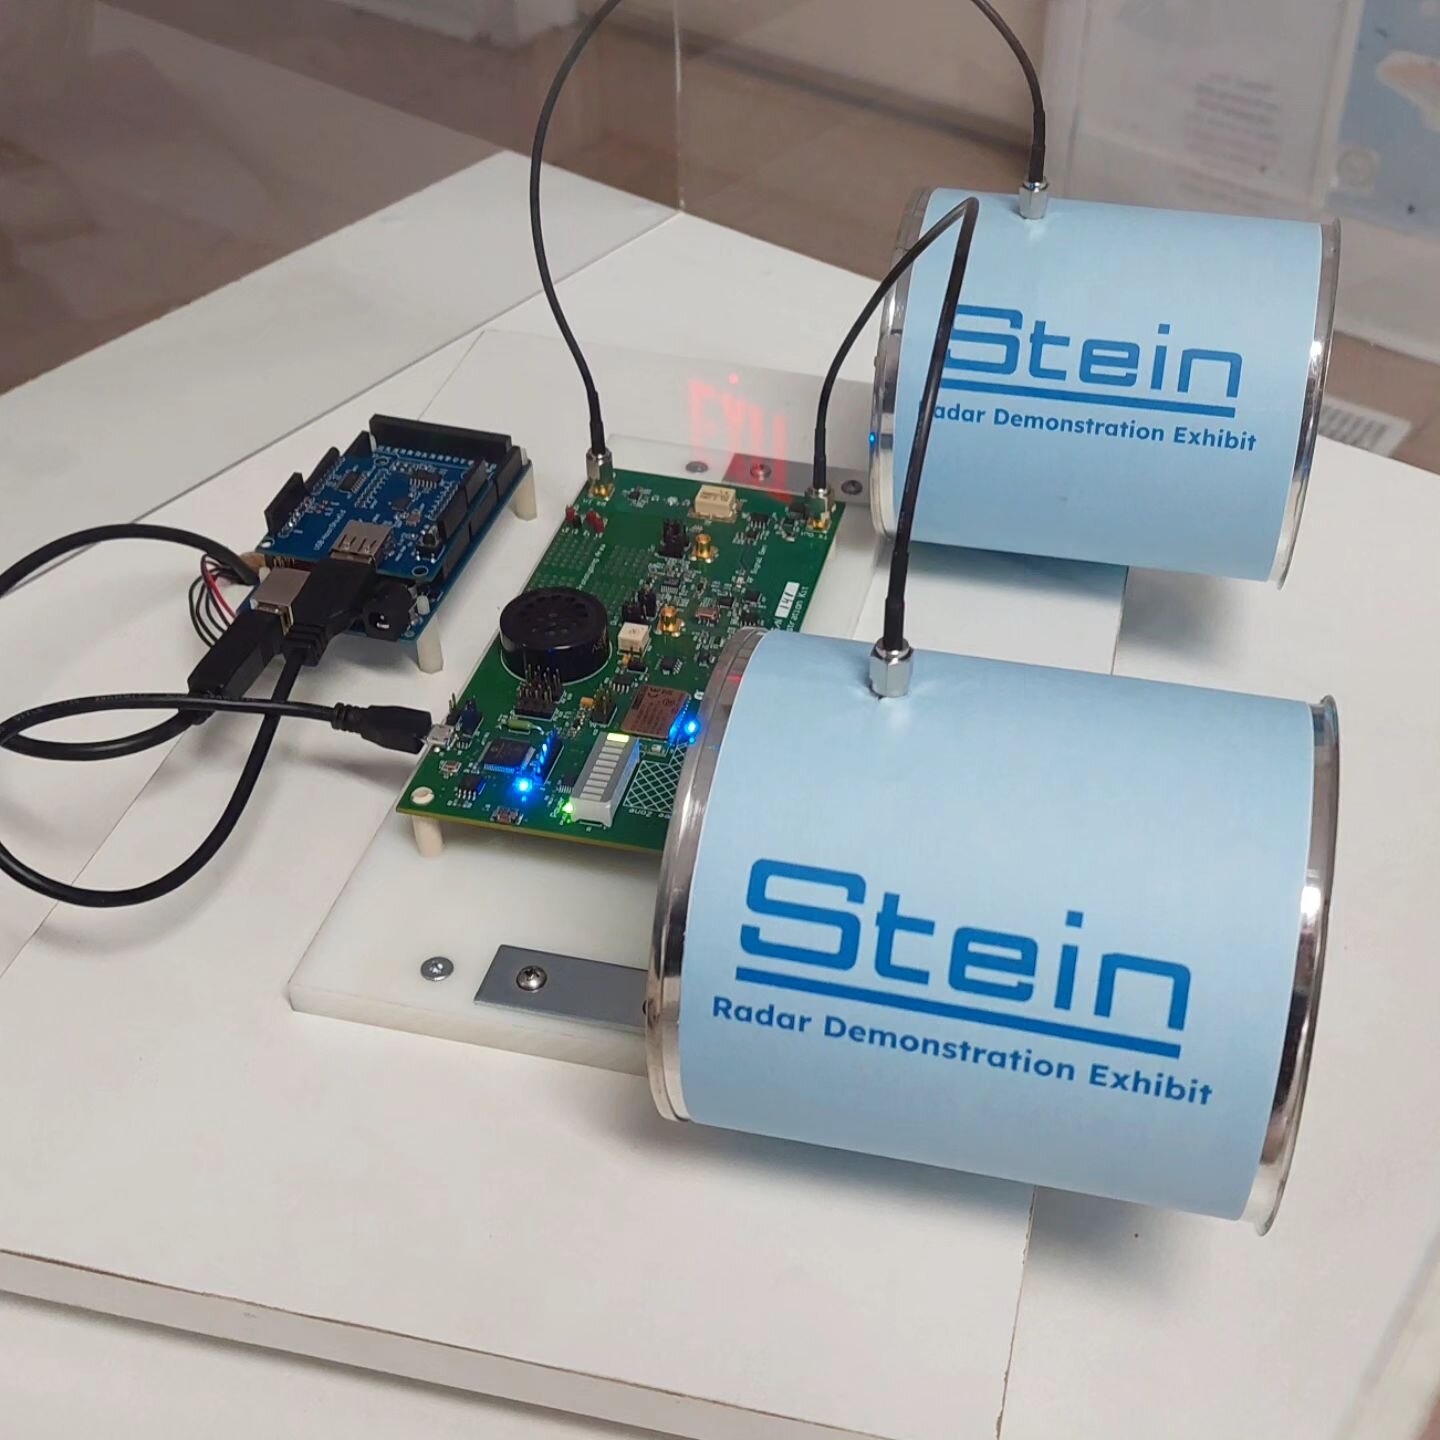 This is our brand new Radar Demonstration Exhibit supported by London's own Stein Industries, Inc.  It uses a frequency-modulated continuous-wave radar to measure the distance between itself and a target (we are using sheet metal, but any radio refle